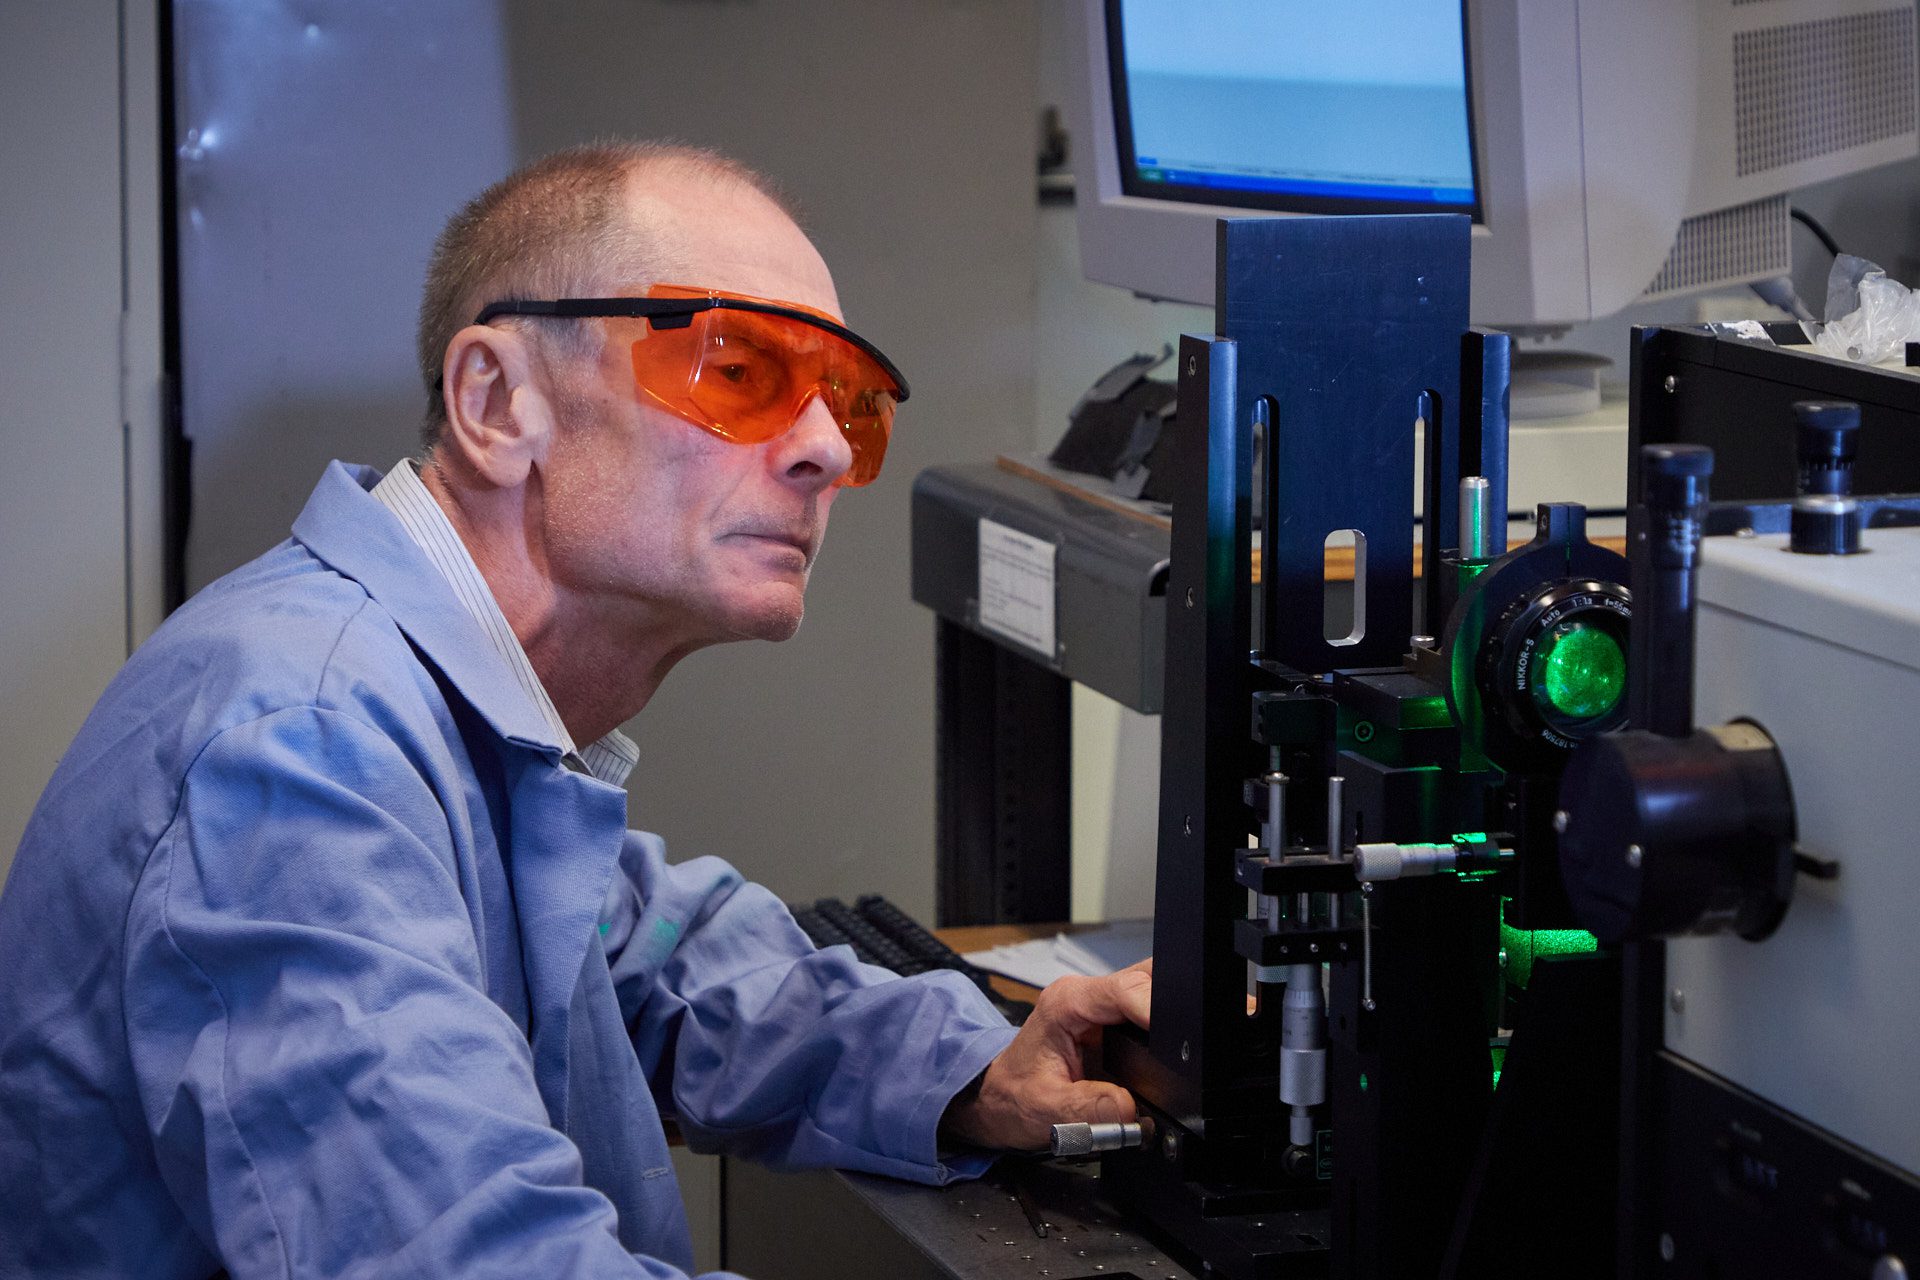 Man wearing safety goggles and blue lab coat looks at machine in lab.